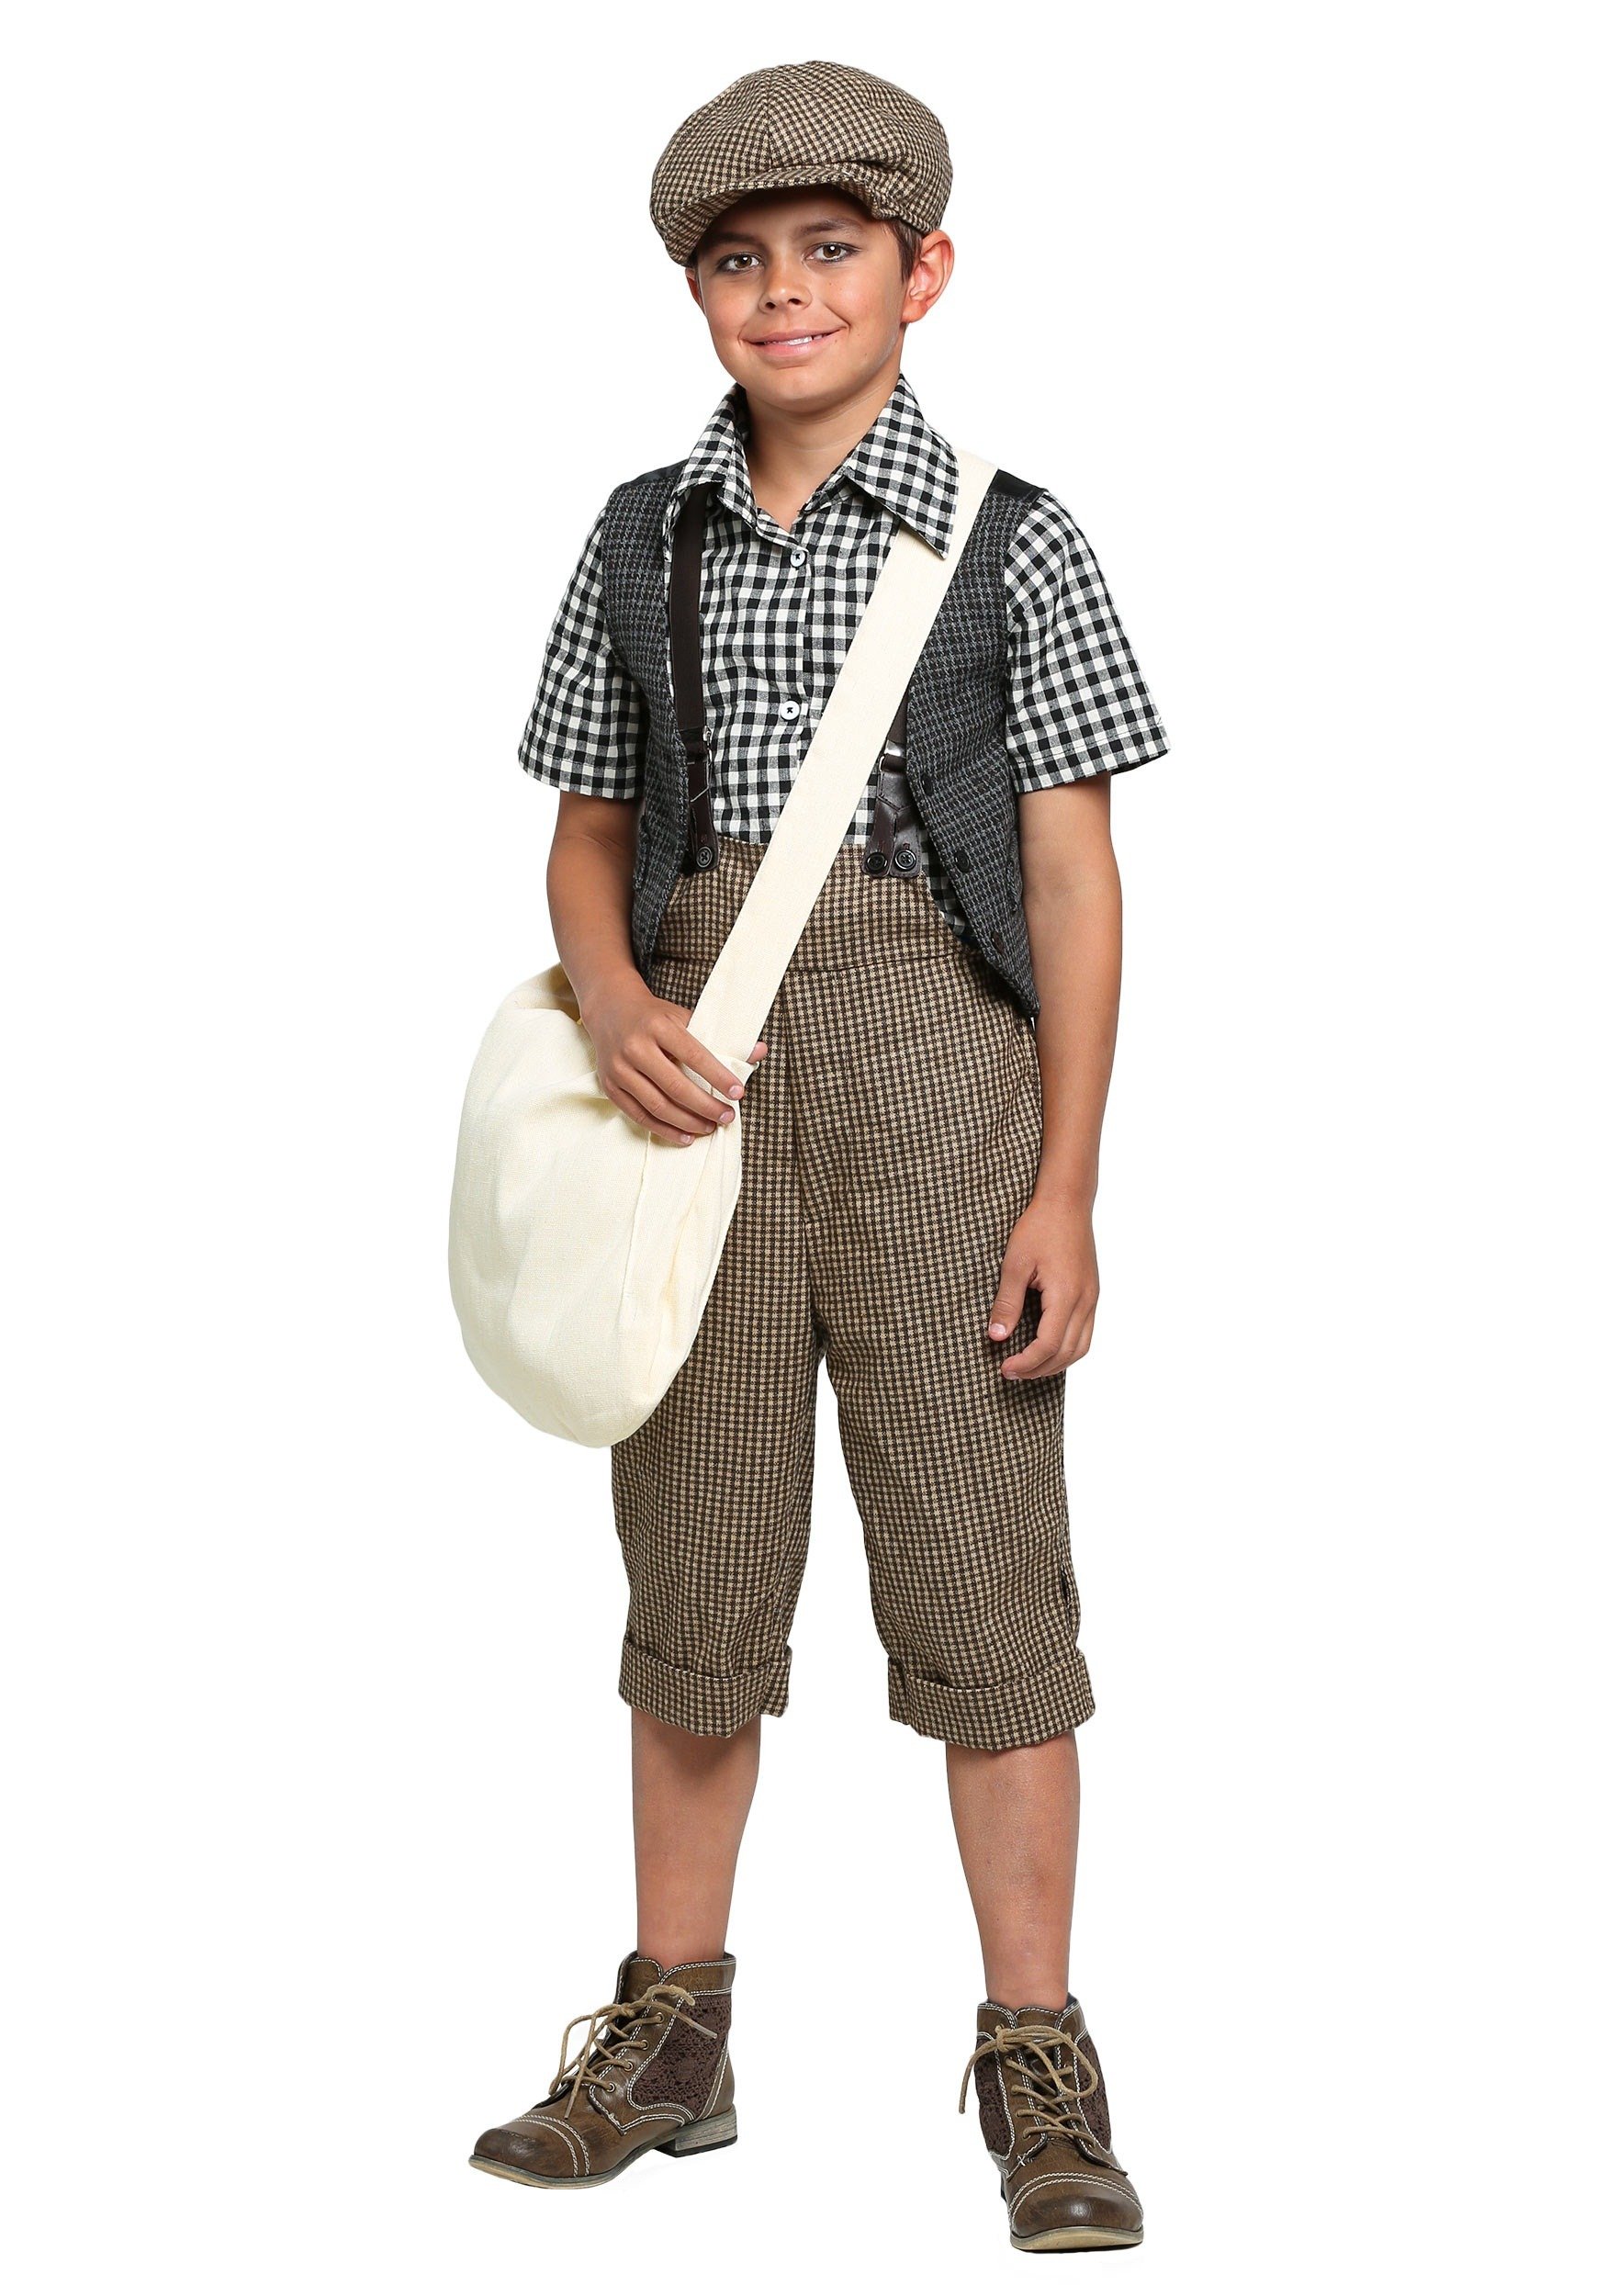 Kid's 20s Newsie Costume Newsboy Outfit for Boys